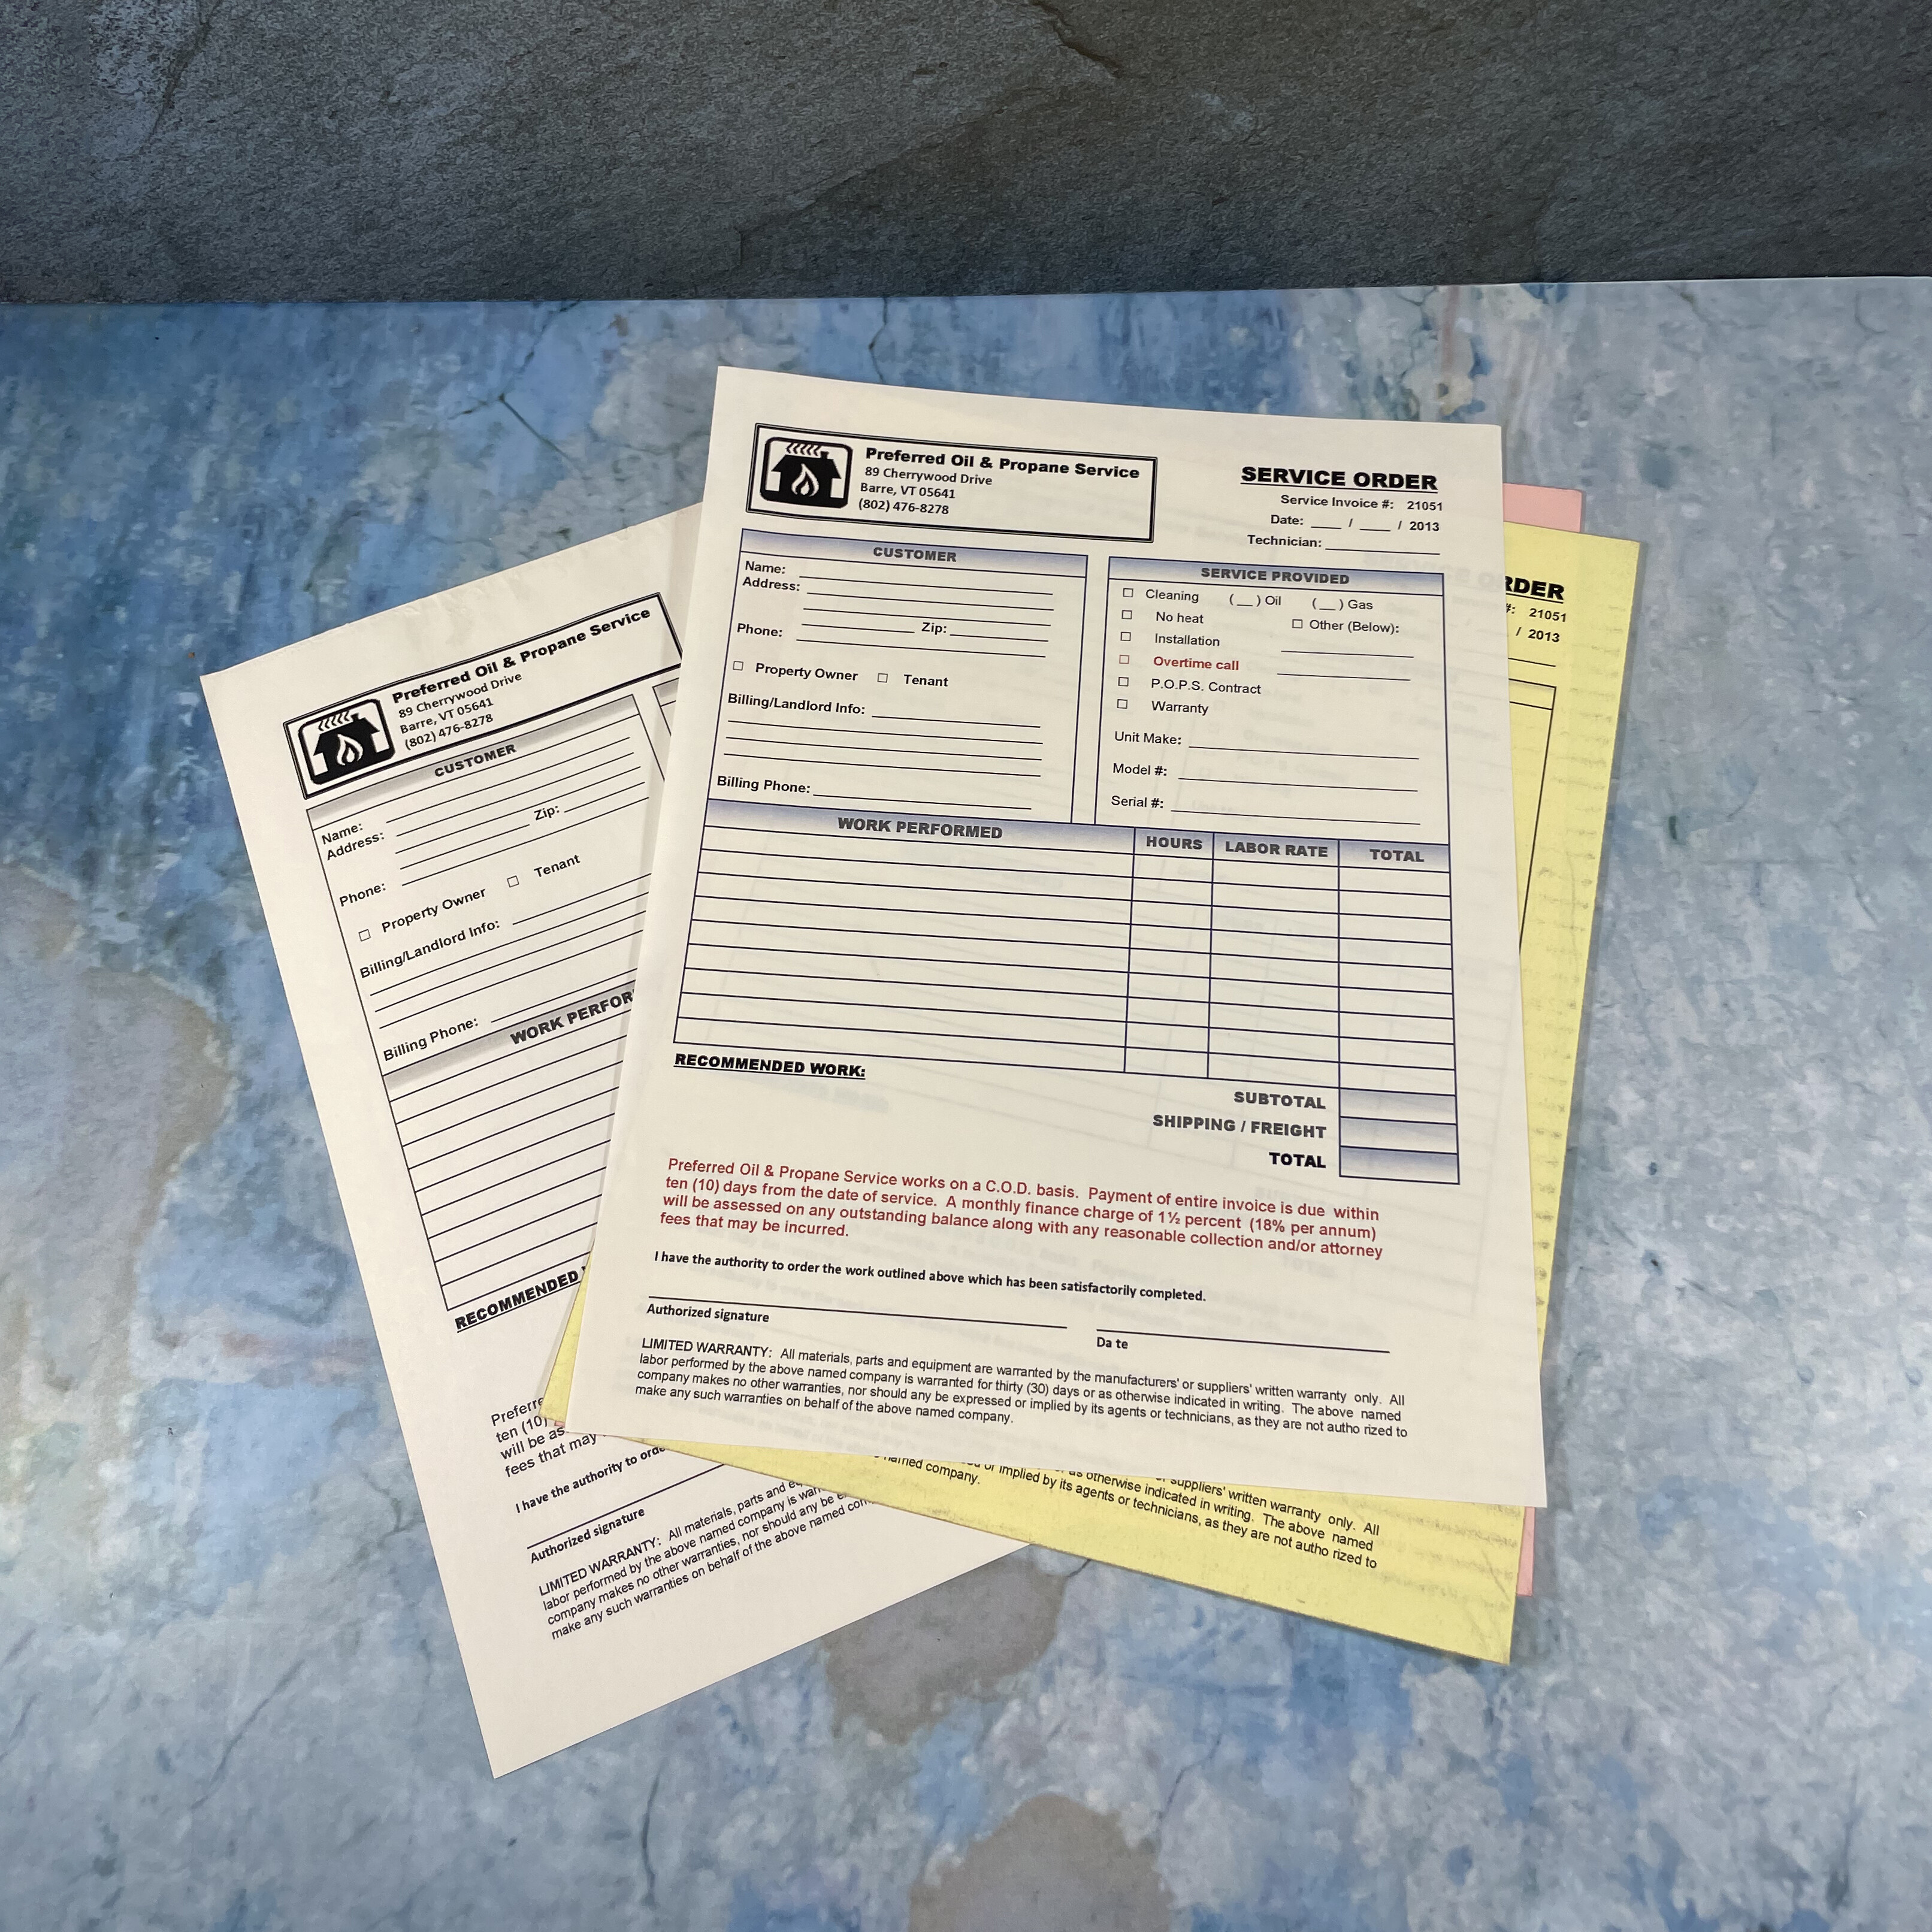 Carbonless/NCR Service Order Forms for Preferred Oil & Propane Service